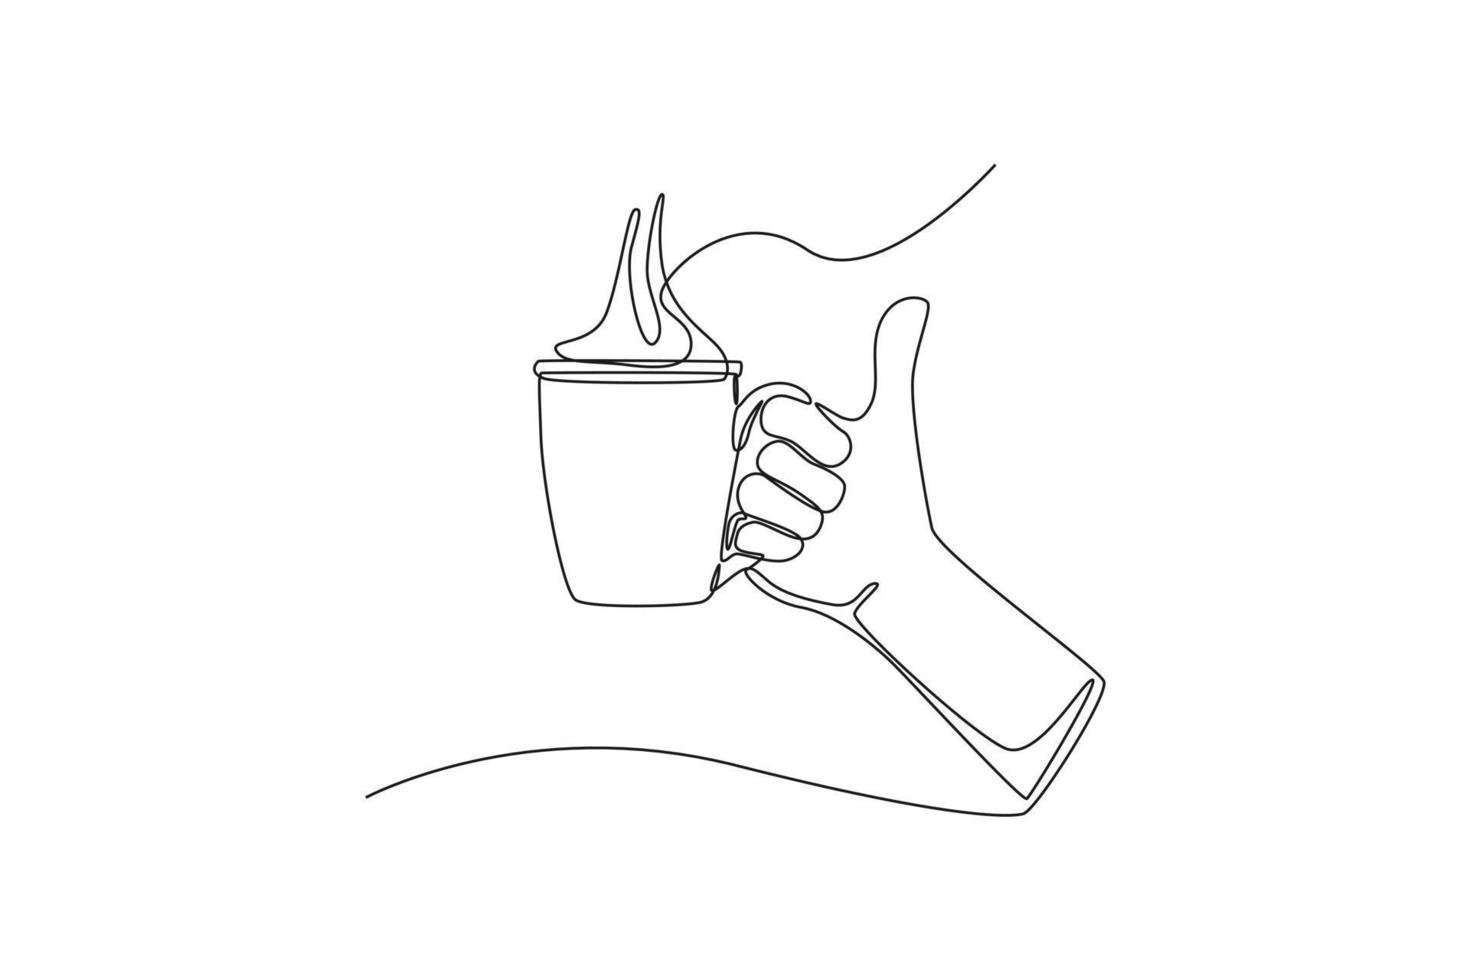 Continuous one line drawing hand is holding a coffee cup. International coffee day concept. Single line draw design vector graphic illustration.